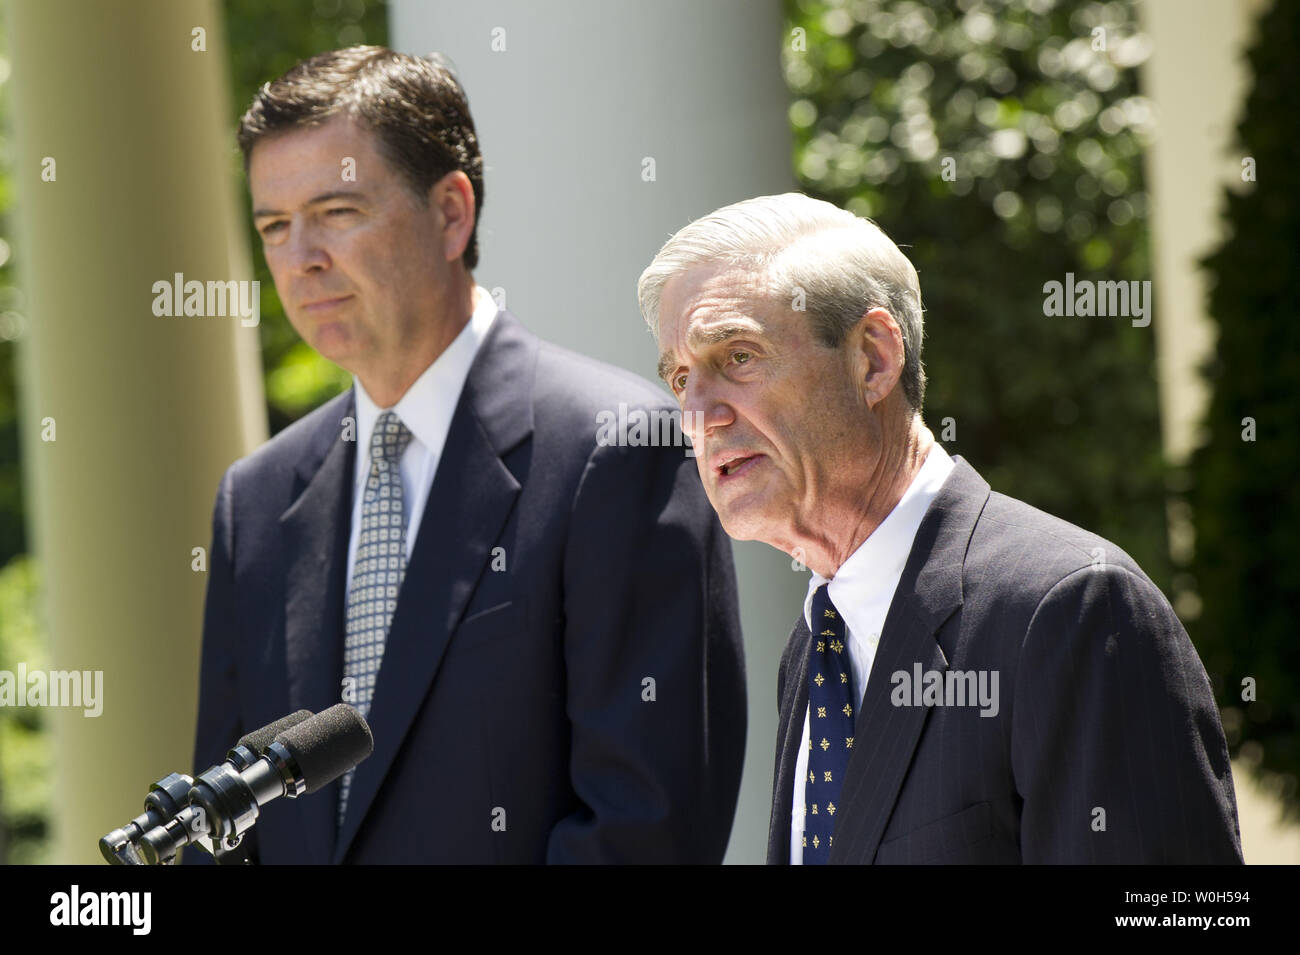 Outgoing FBI director Robert Mueller (R) delivers remarks alongside Presdient Obama's nominee to replace him James Comey, during a ceremony in the Rose Garden at the White House on June 21, 2013.  UPI/Kevin Dietsch Stock Photo